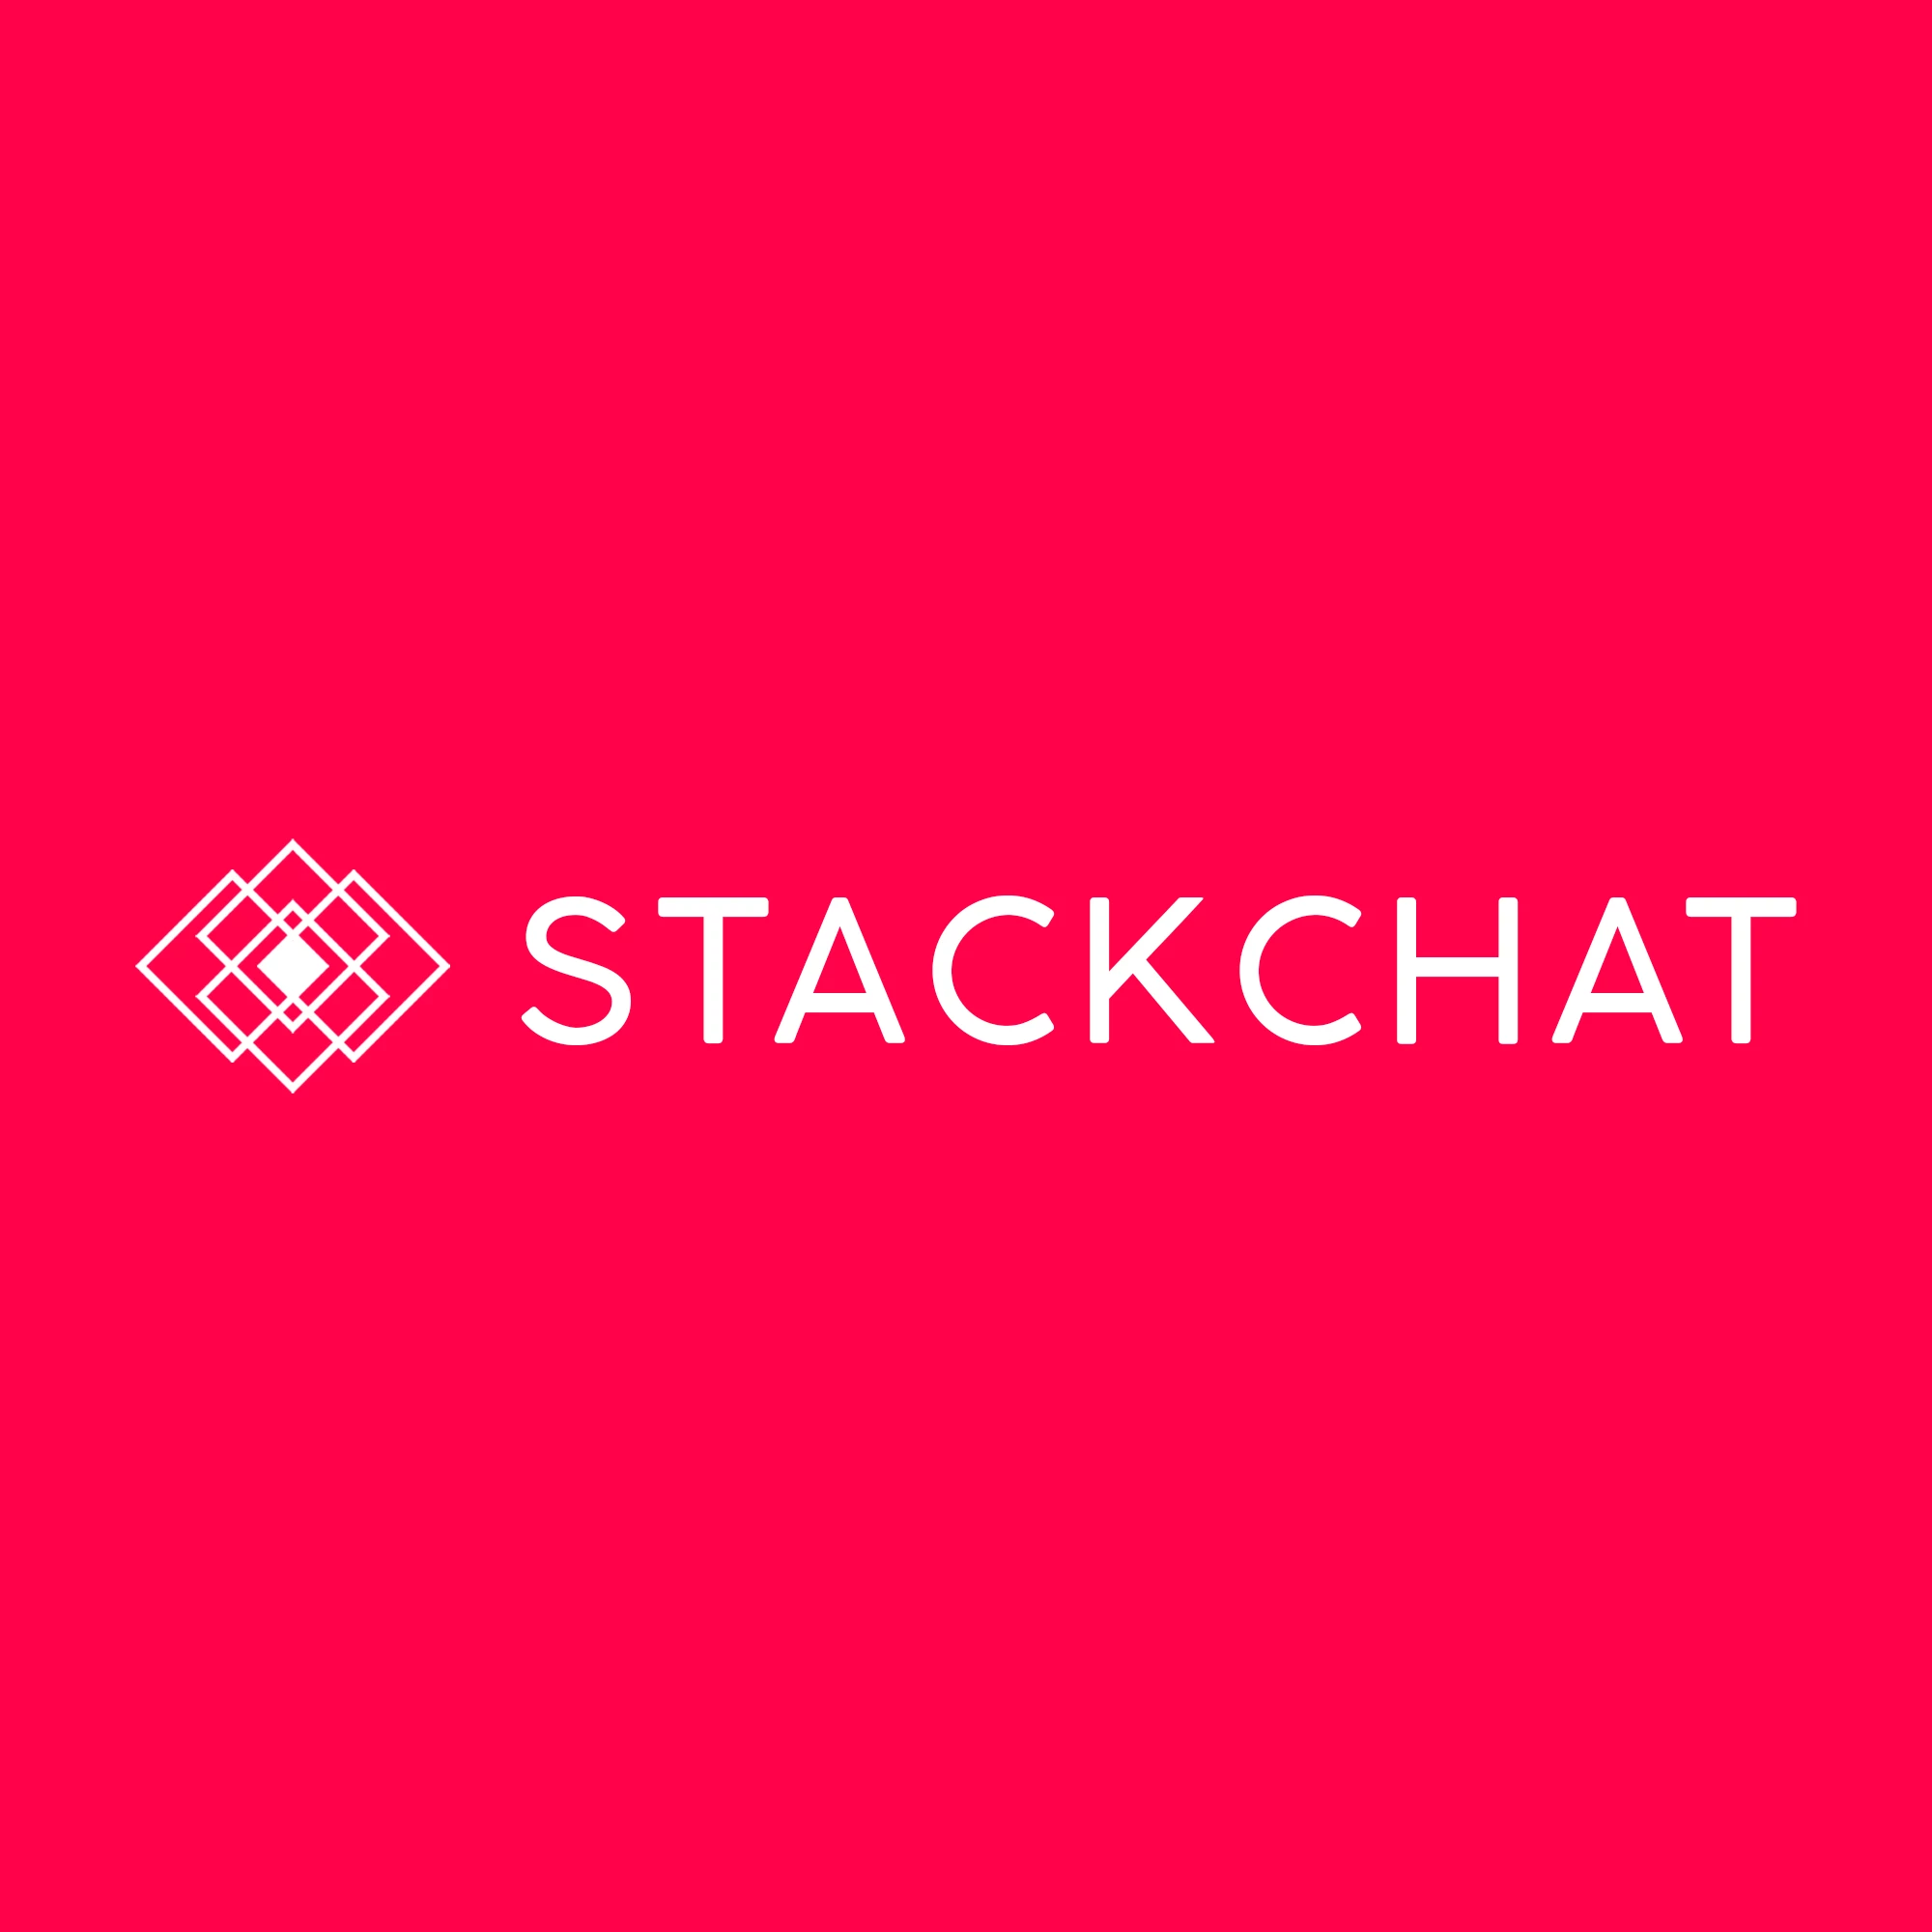 73-stackchat-logo-red-w-text.png